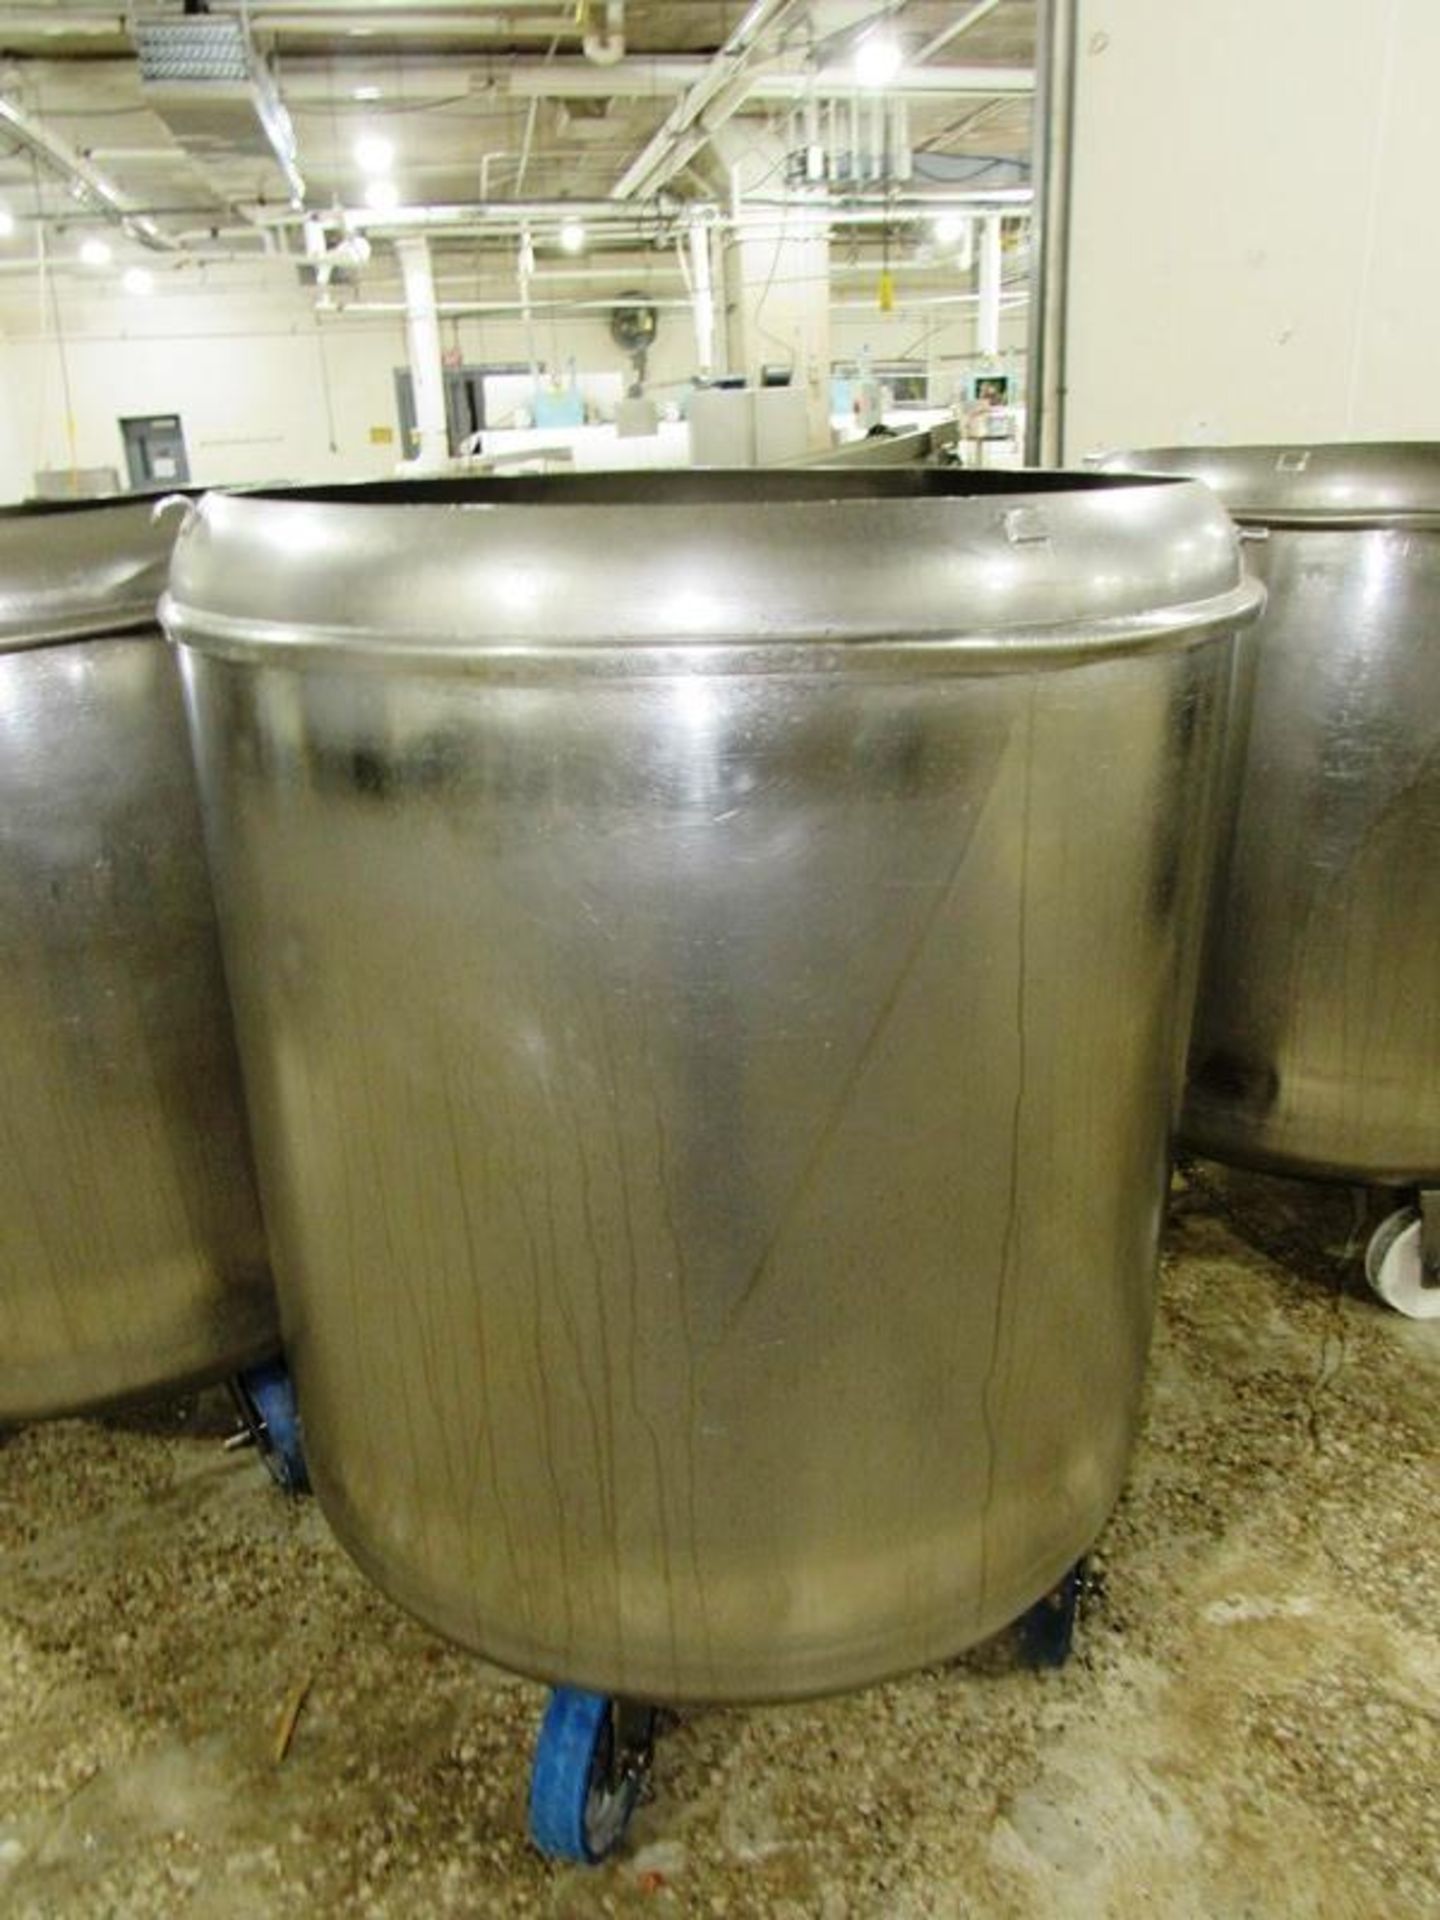 Globus Mdl. HS 3/5 Tumbling System, tumbling bed, (1) 750 liter stainless steel drum with lid, - Image 5 of 5